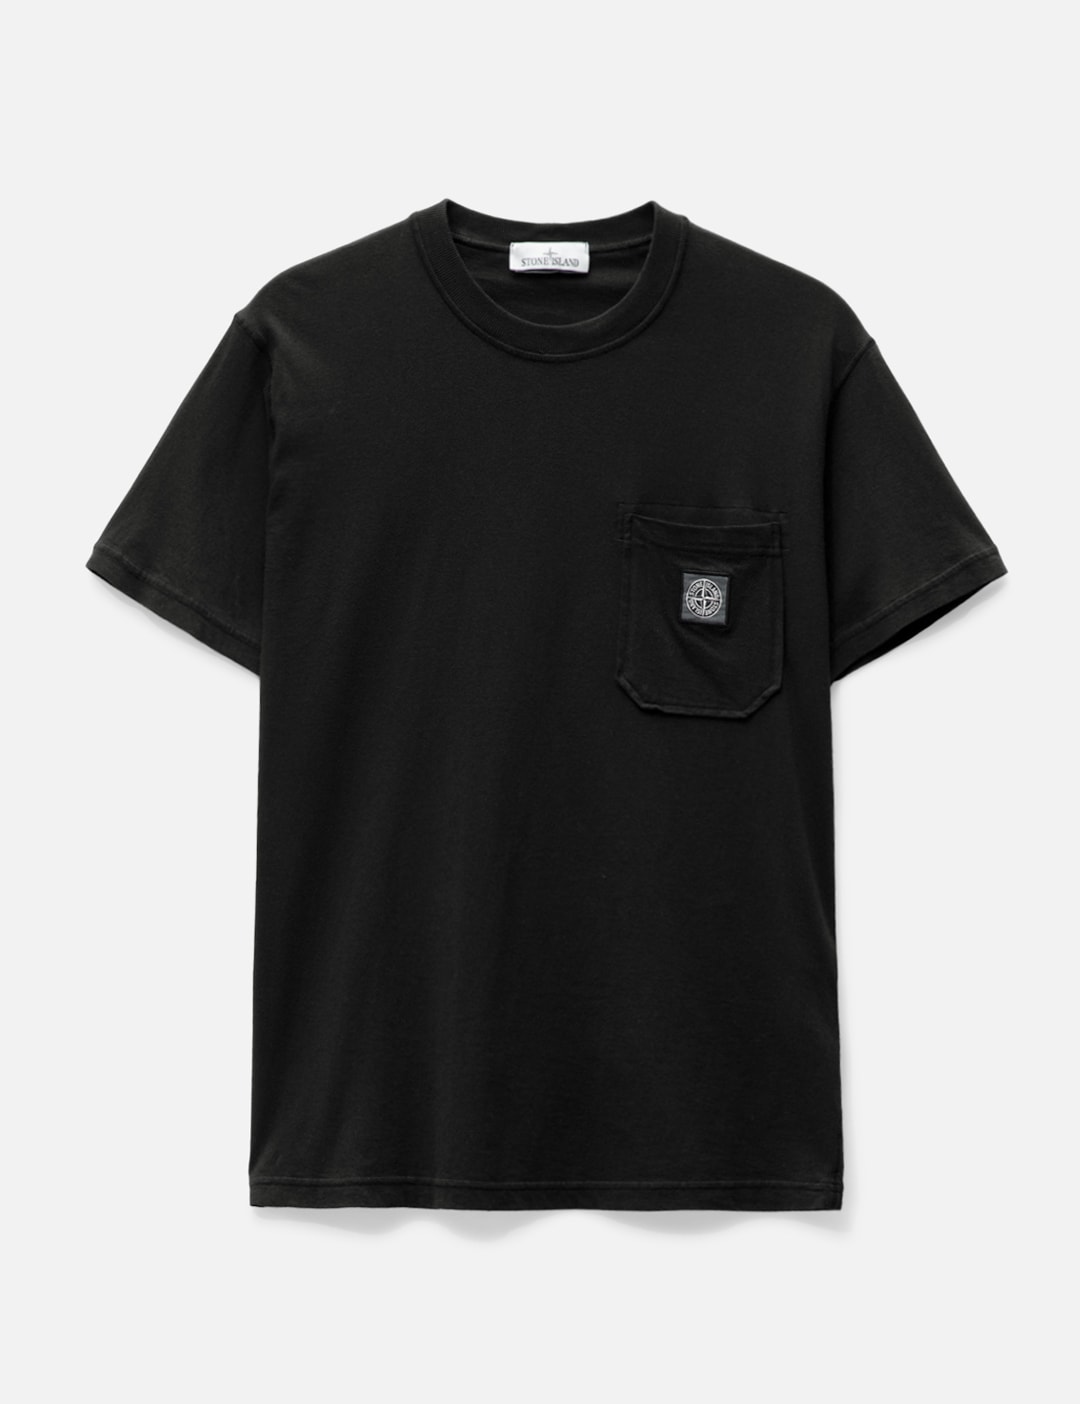 Overleg Concreet Denemarken Stone Island - POCKET T-SHIRT | HBX - Globally Curated Fashion and  Lifestyle by Hypebeast